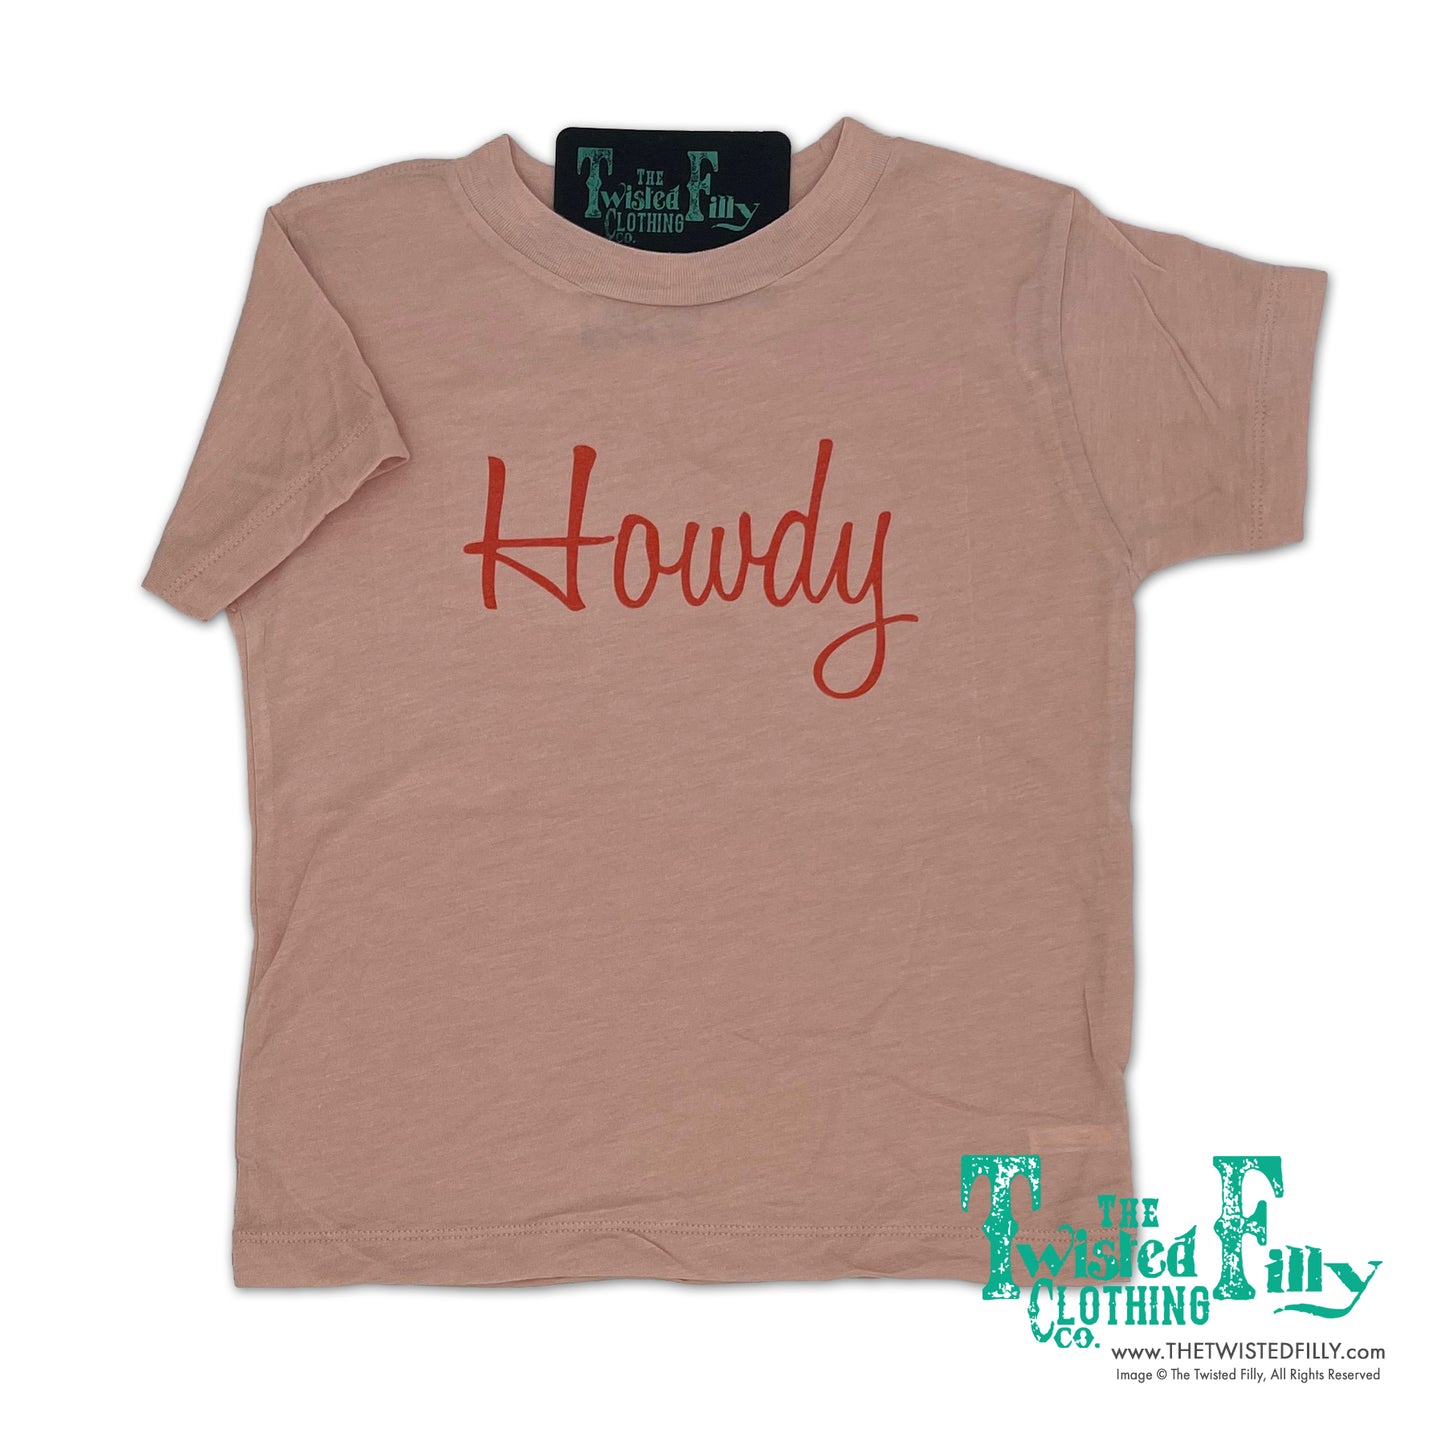 Howdy - S/S Infant Tee -  Dusty Rose